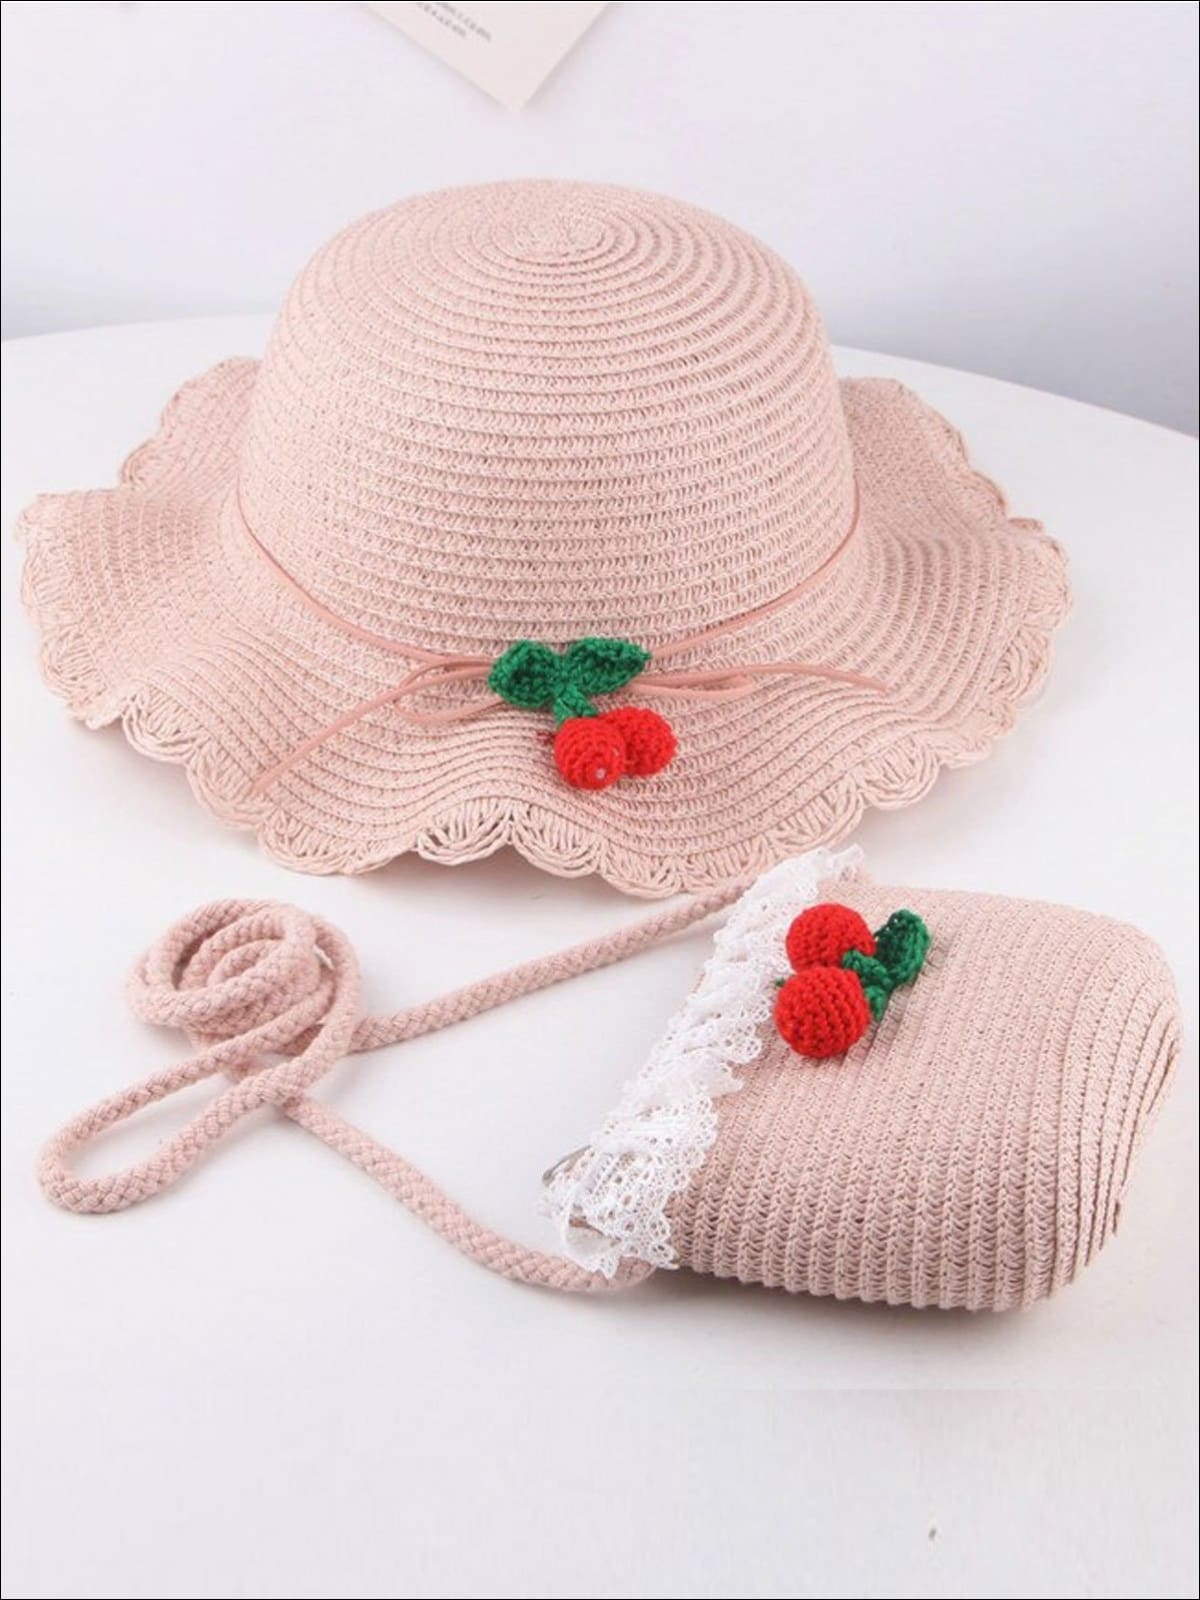 Girls Retro Straw Hat and Matching Mini Purse With Cherries - Pink / One Size - Girls Hats